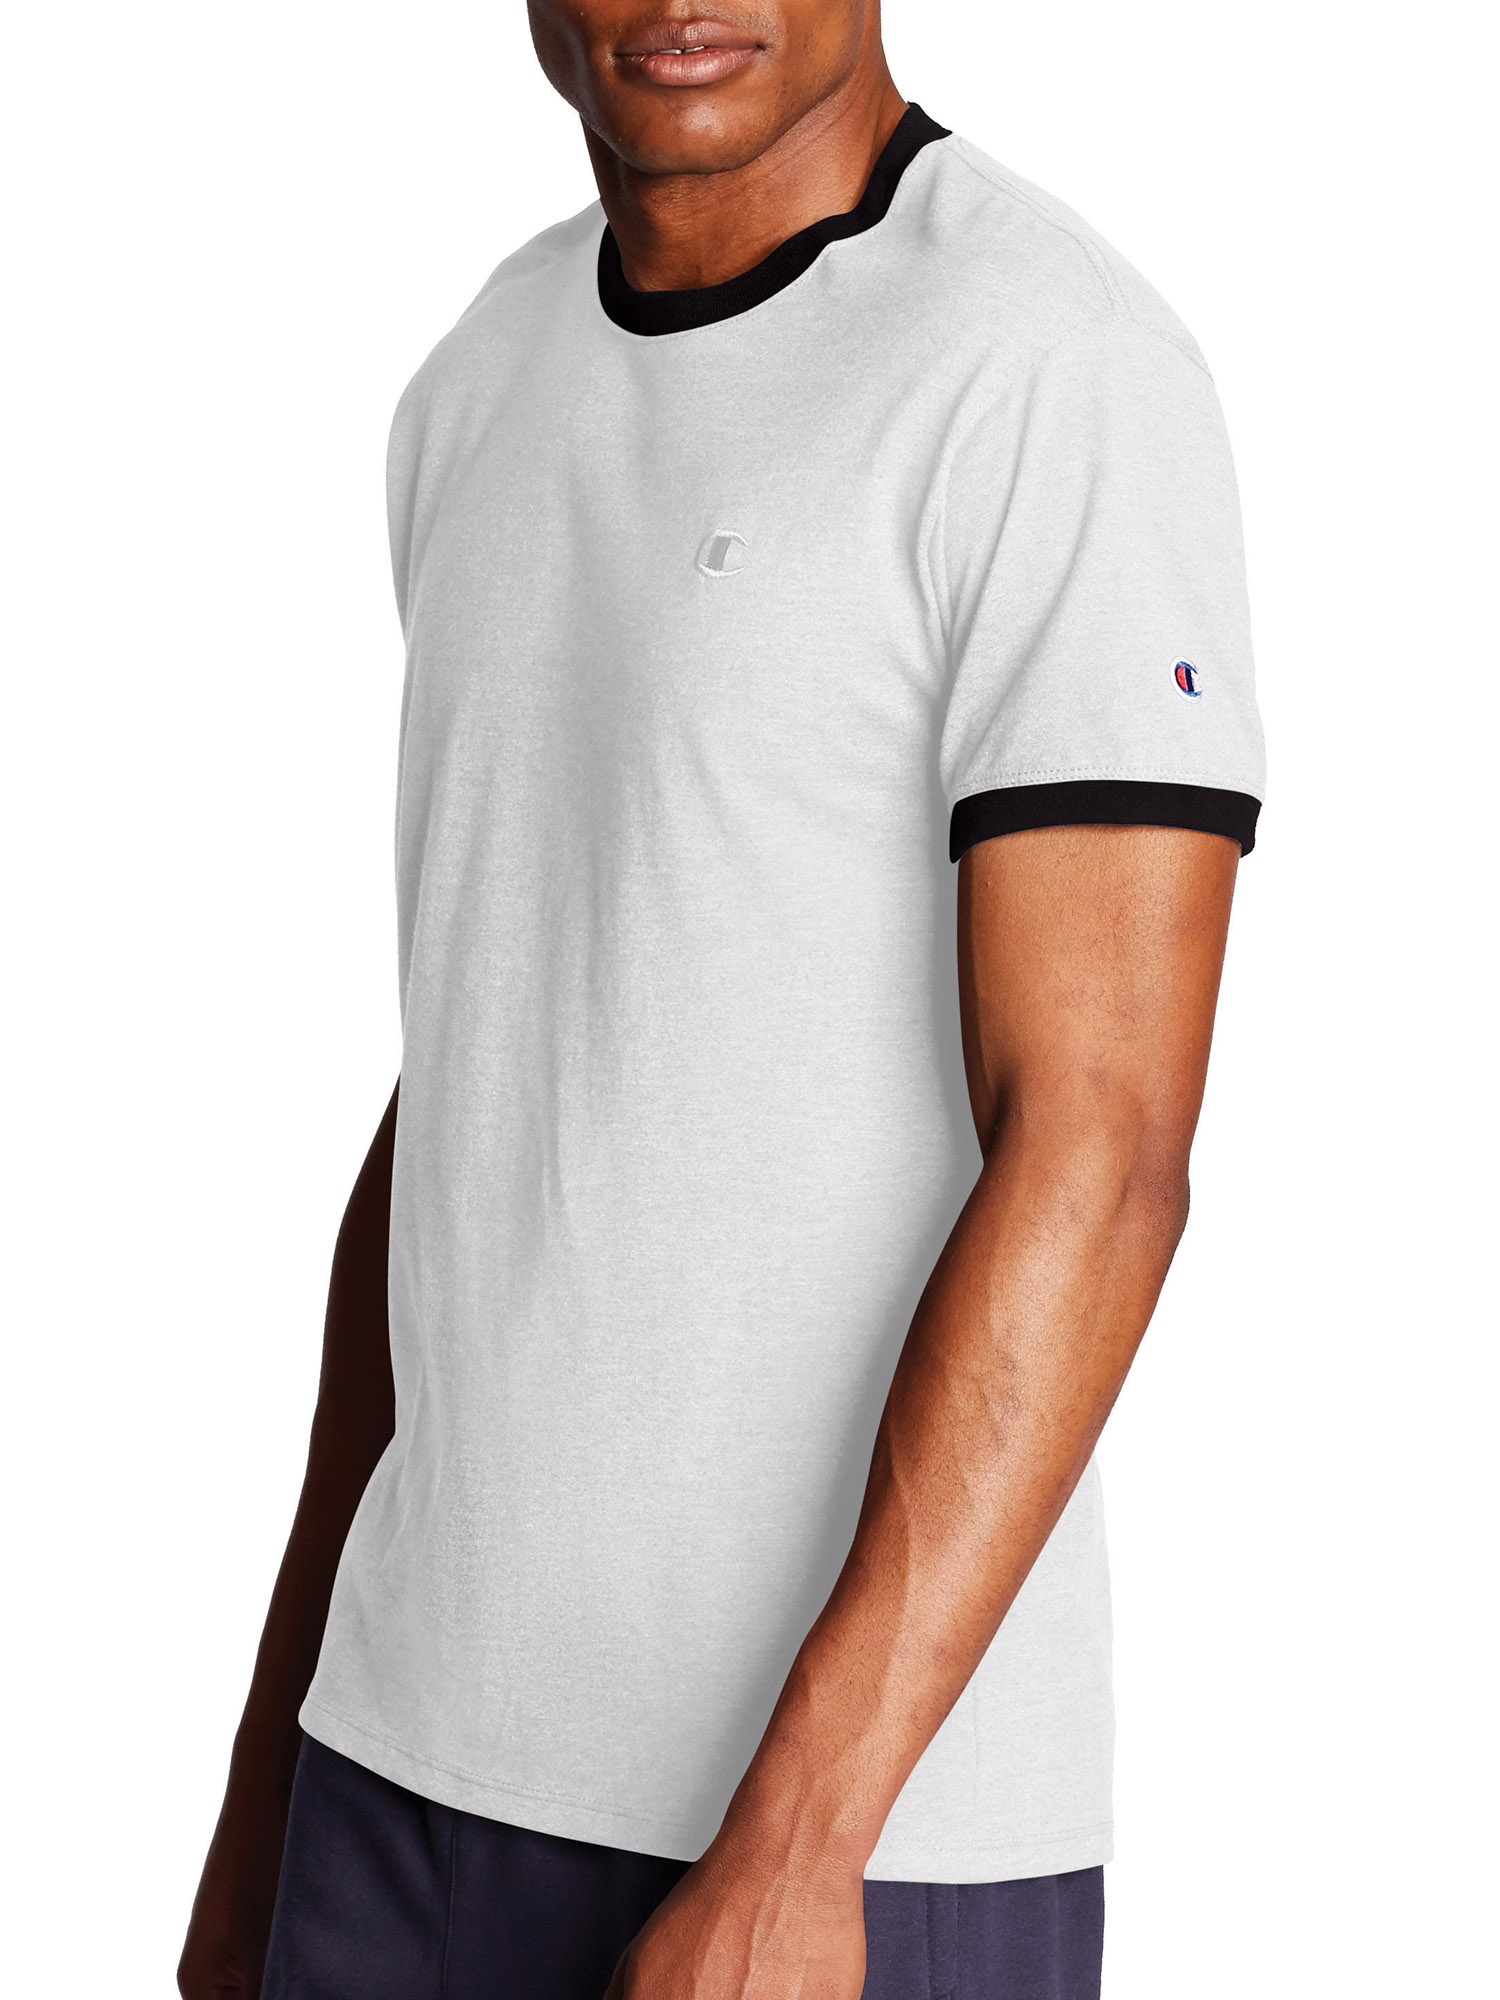 Champion Men's Classic Jersey Ringer Tee - image 2 of 7